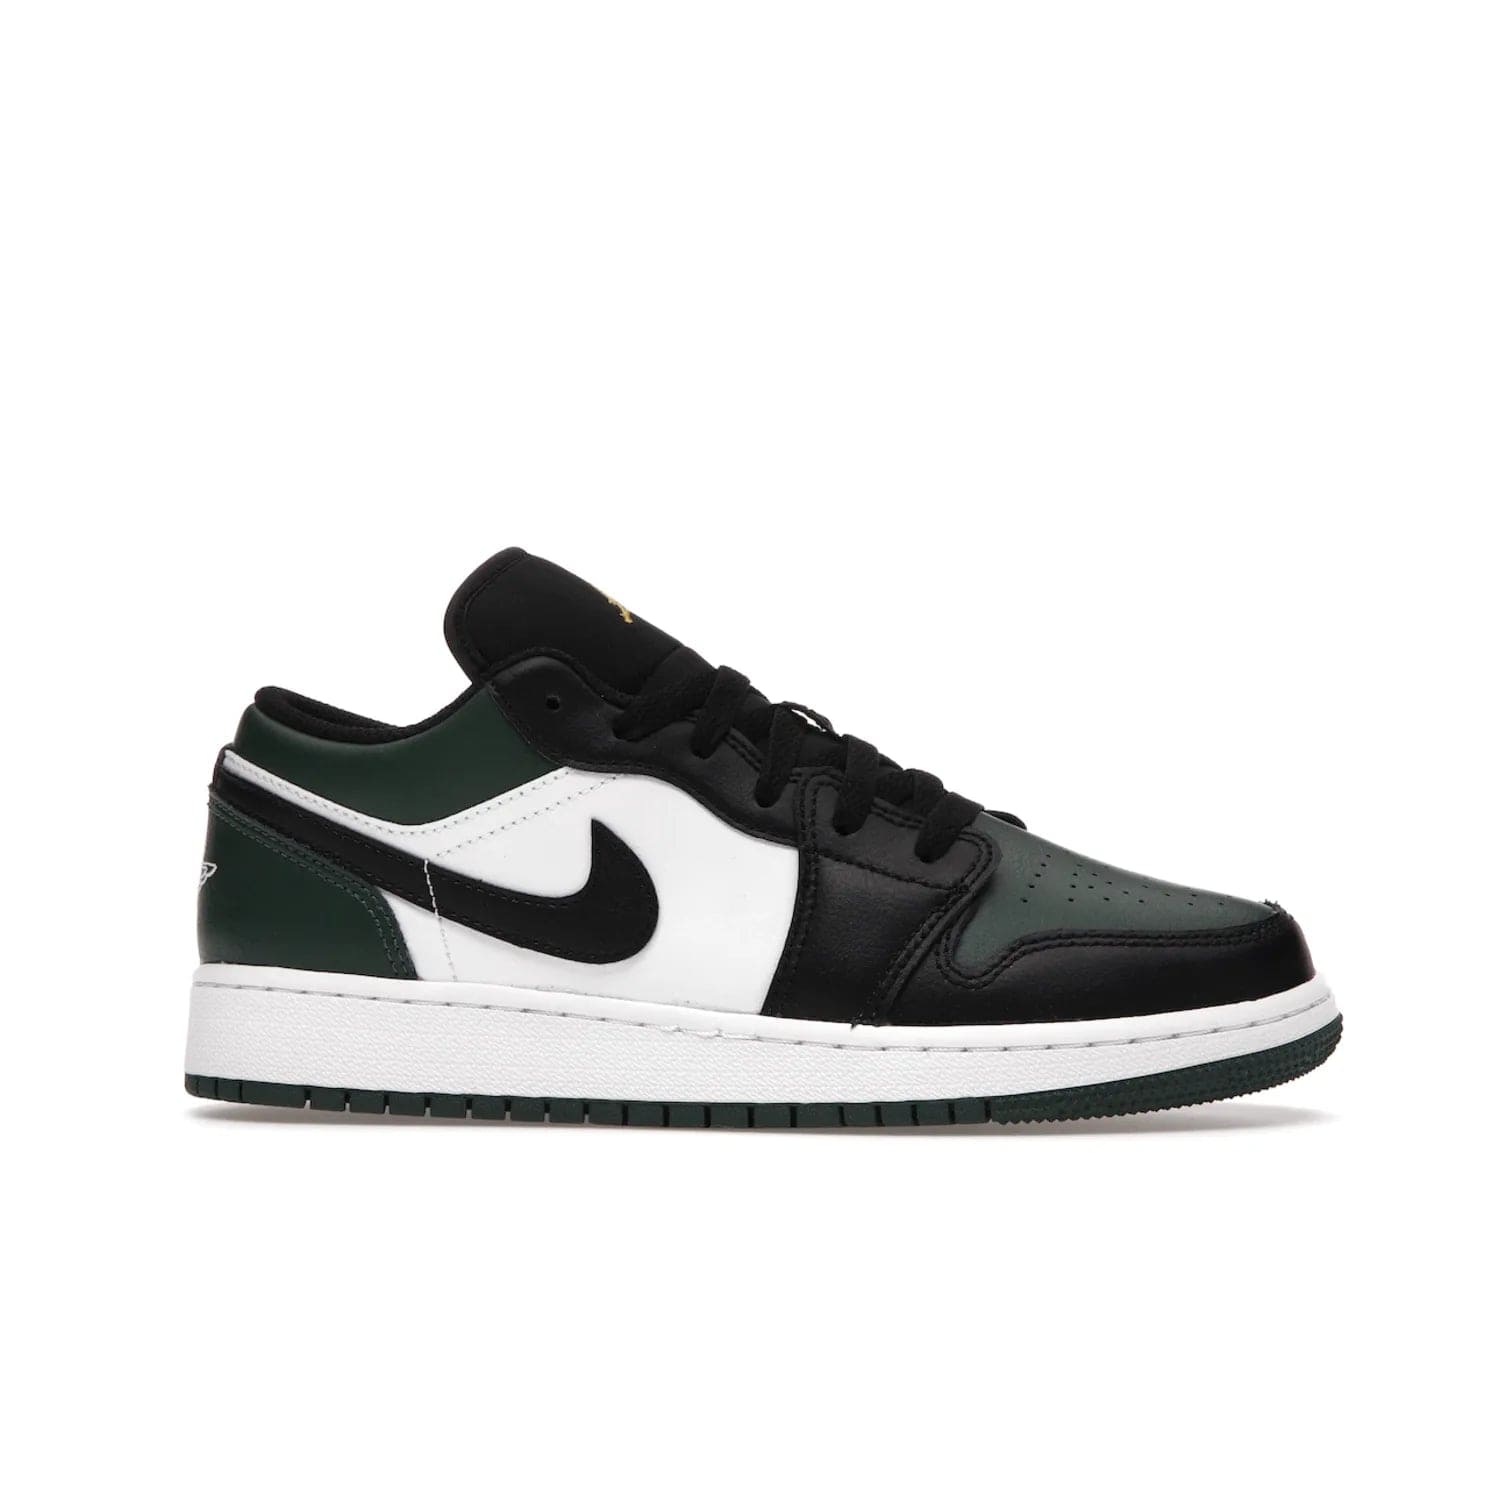 Jordan 1 Low Green Toe (GS) - Image 2 - Only at www.BallersClubKickz.com - Get the perfect low cut Jordans. Shop the Air Jordan 1 Low Noble Green GS shoes with its unique colorway and stencil Jumpman logo. Available October 2021.